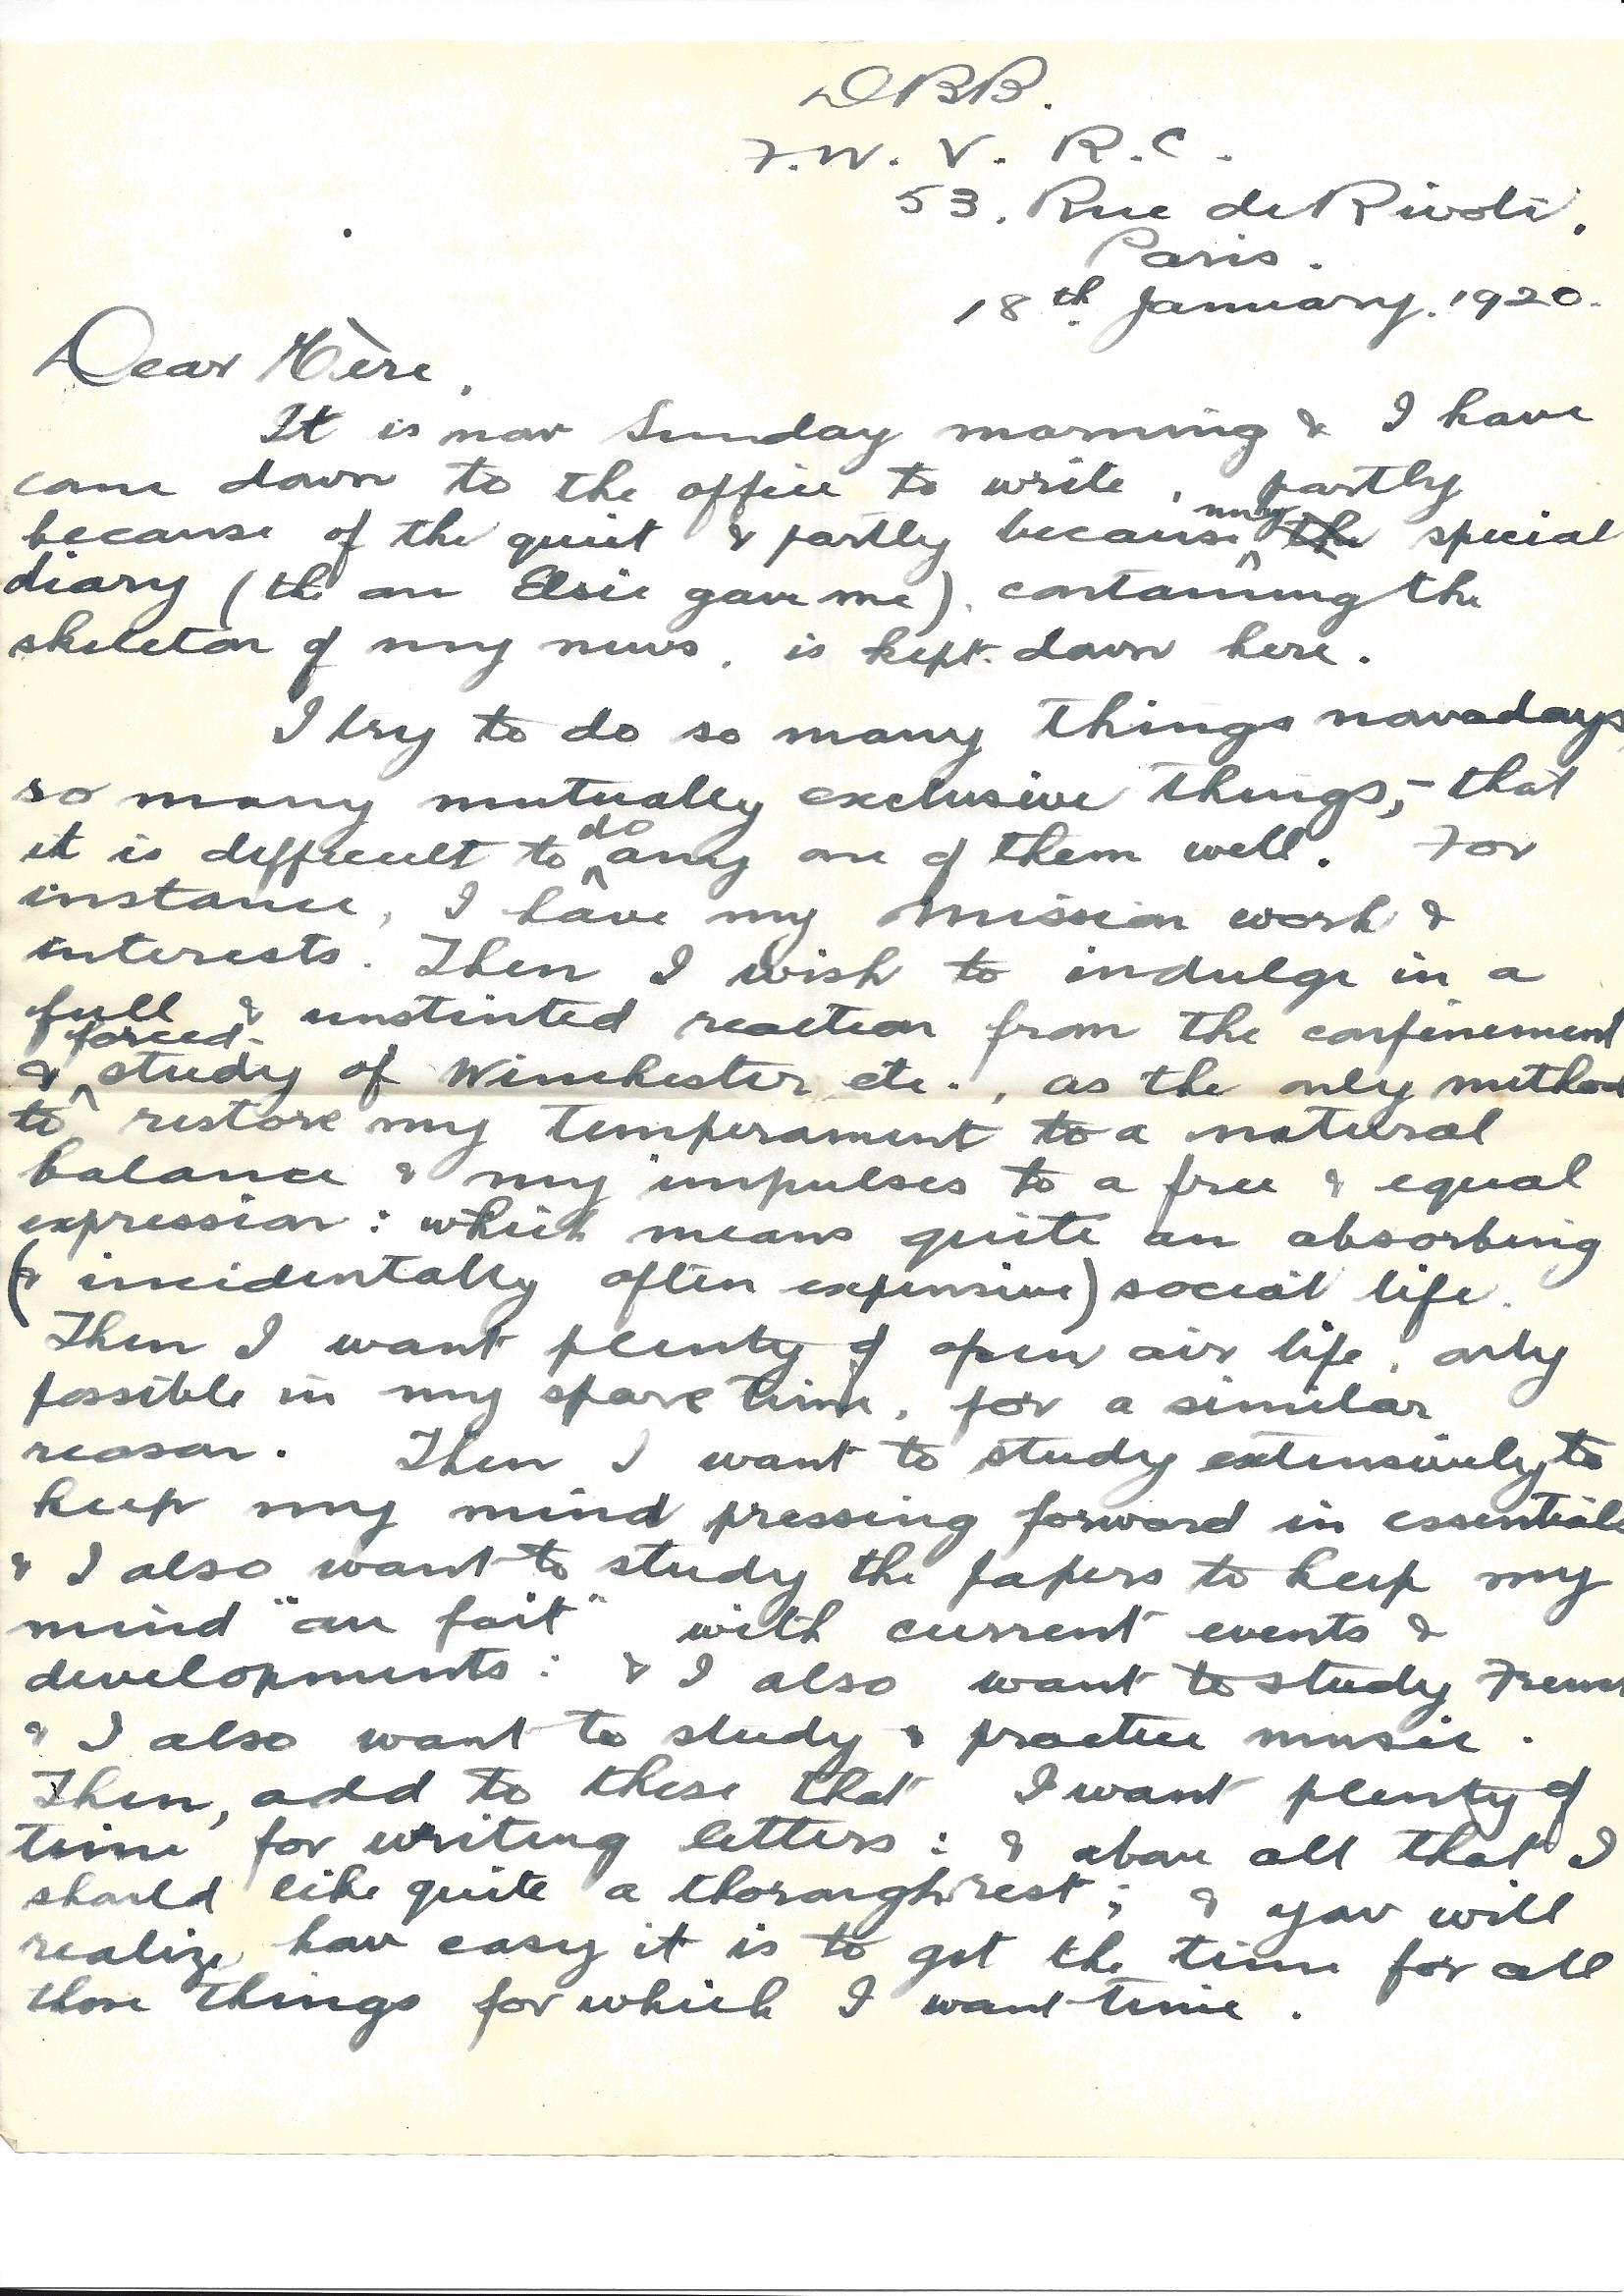 1920-01-18 page 2 letter by Donald Bearman